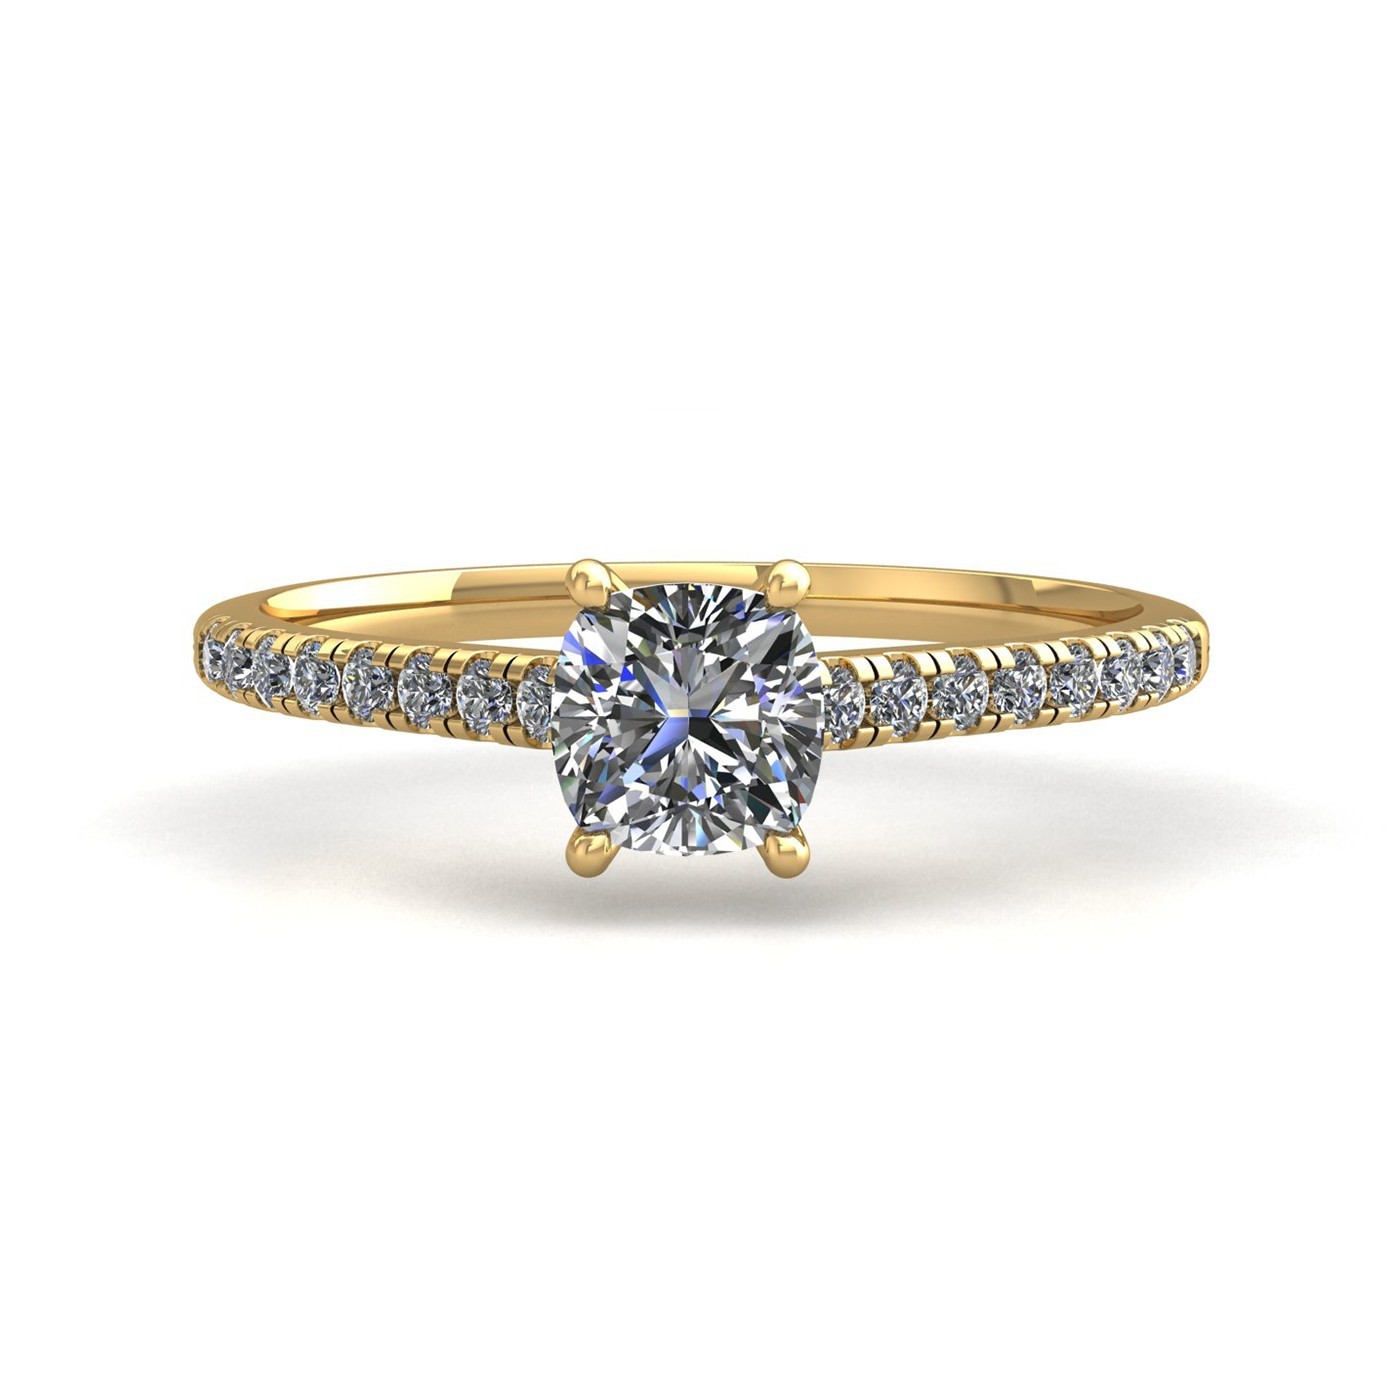 18k yellow gold 2.0ct 4 prongs cushion cut diamond engagement ring with whisper thin pavÉ set band Photos & images